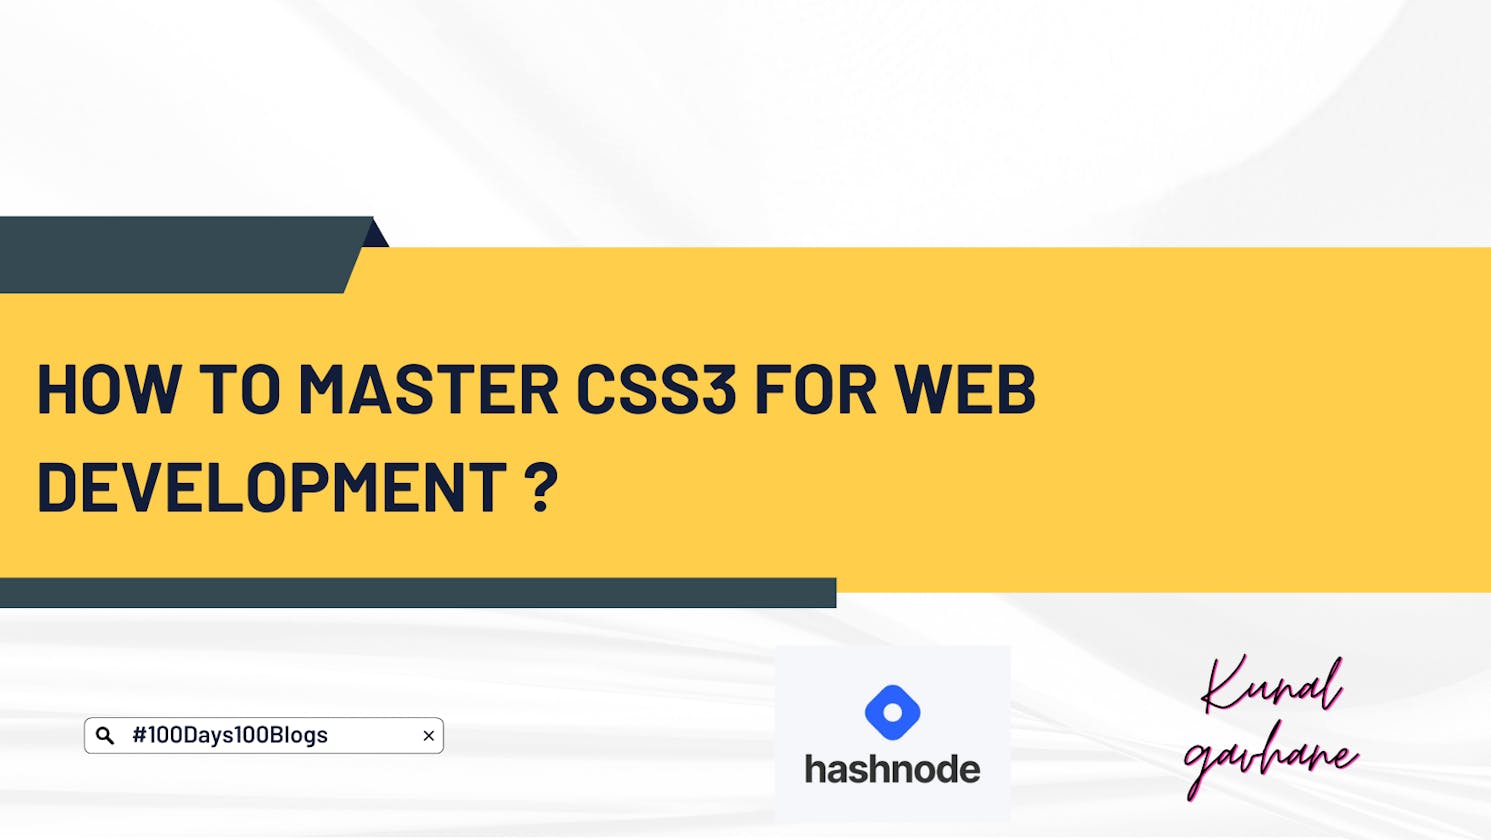 How to master CSS3 for web development ?